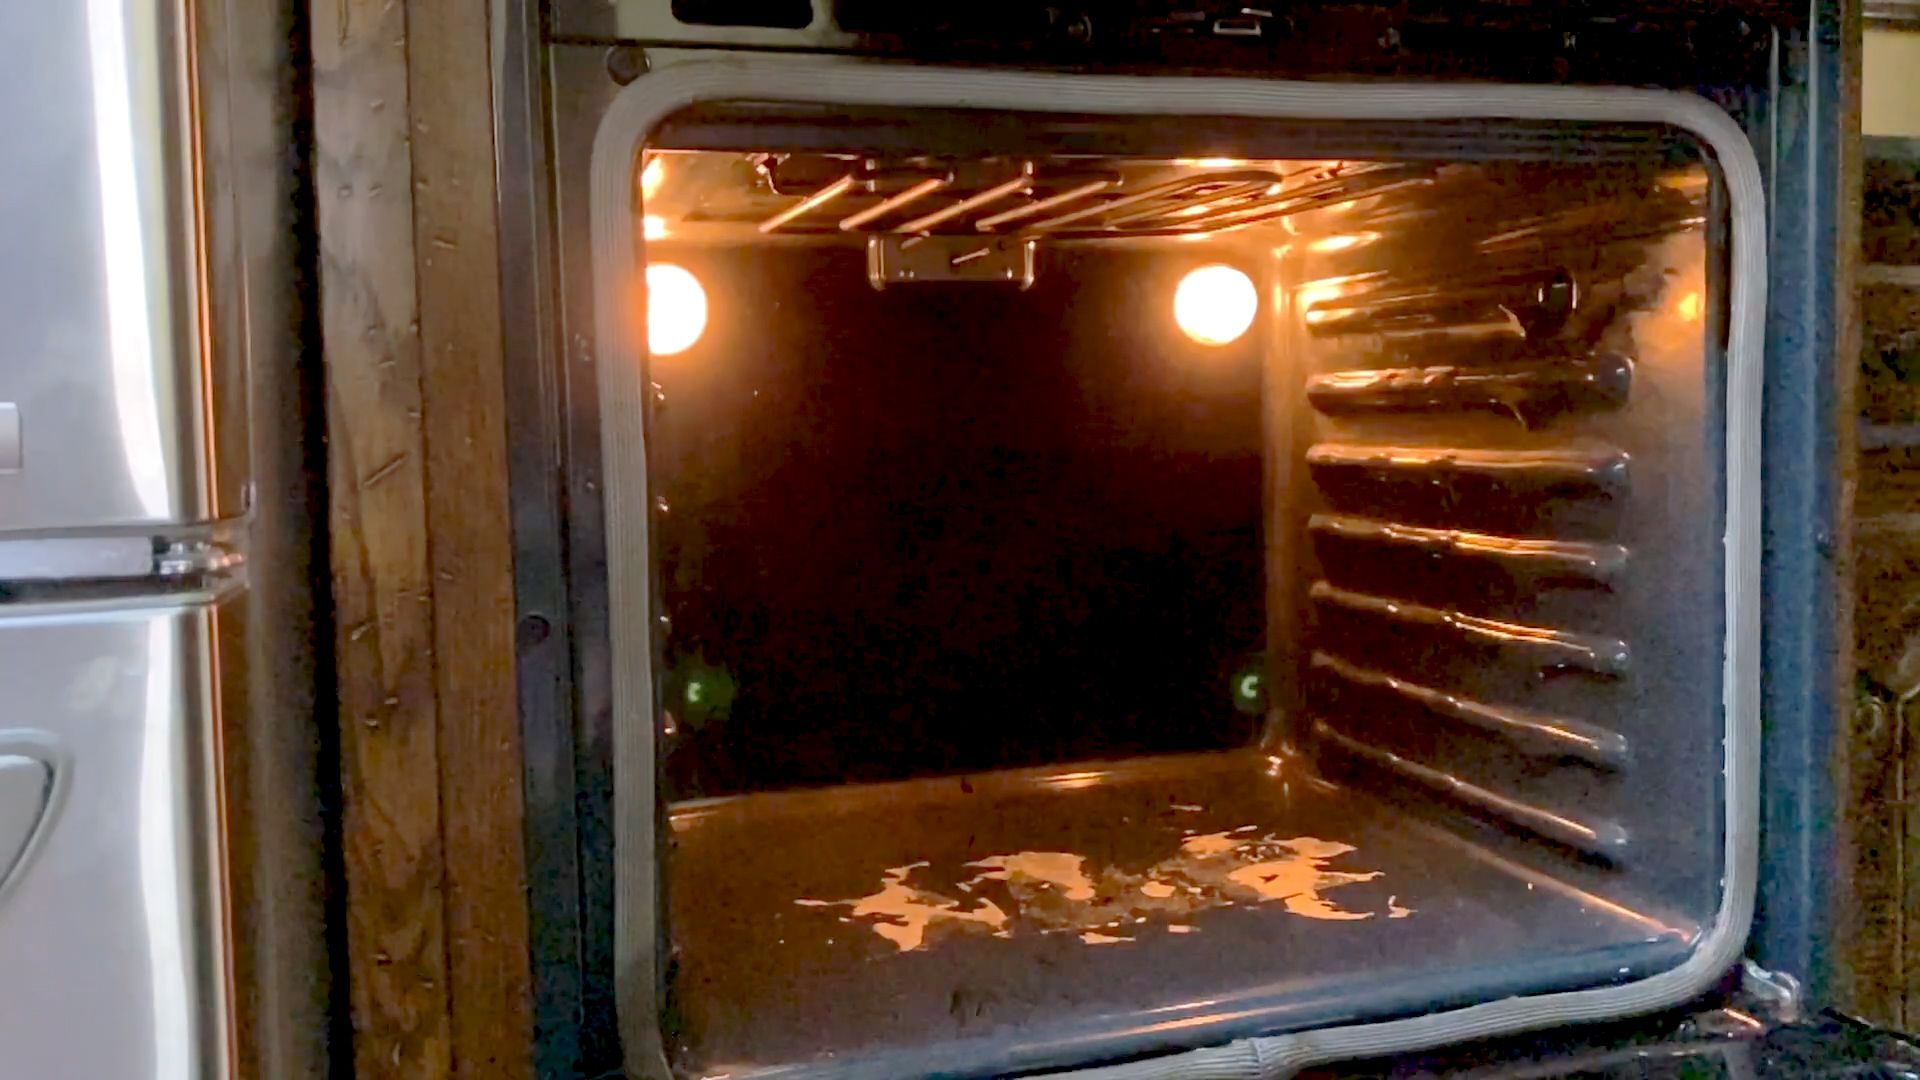 How to clean an oven quickly and easily